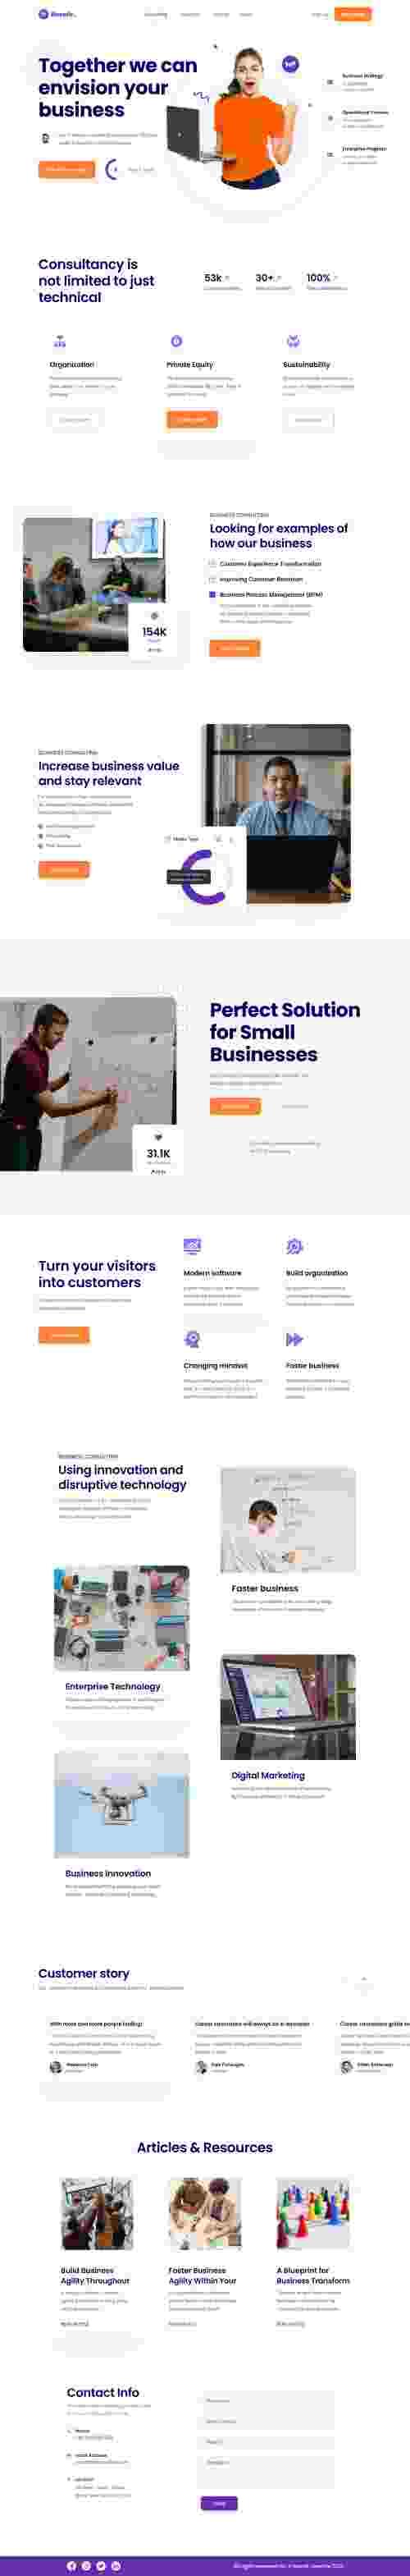 UIHut - Besnik Business Consulting Landing Page - 12109